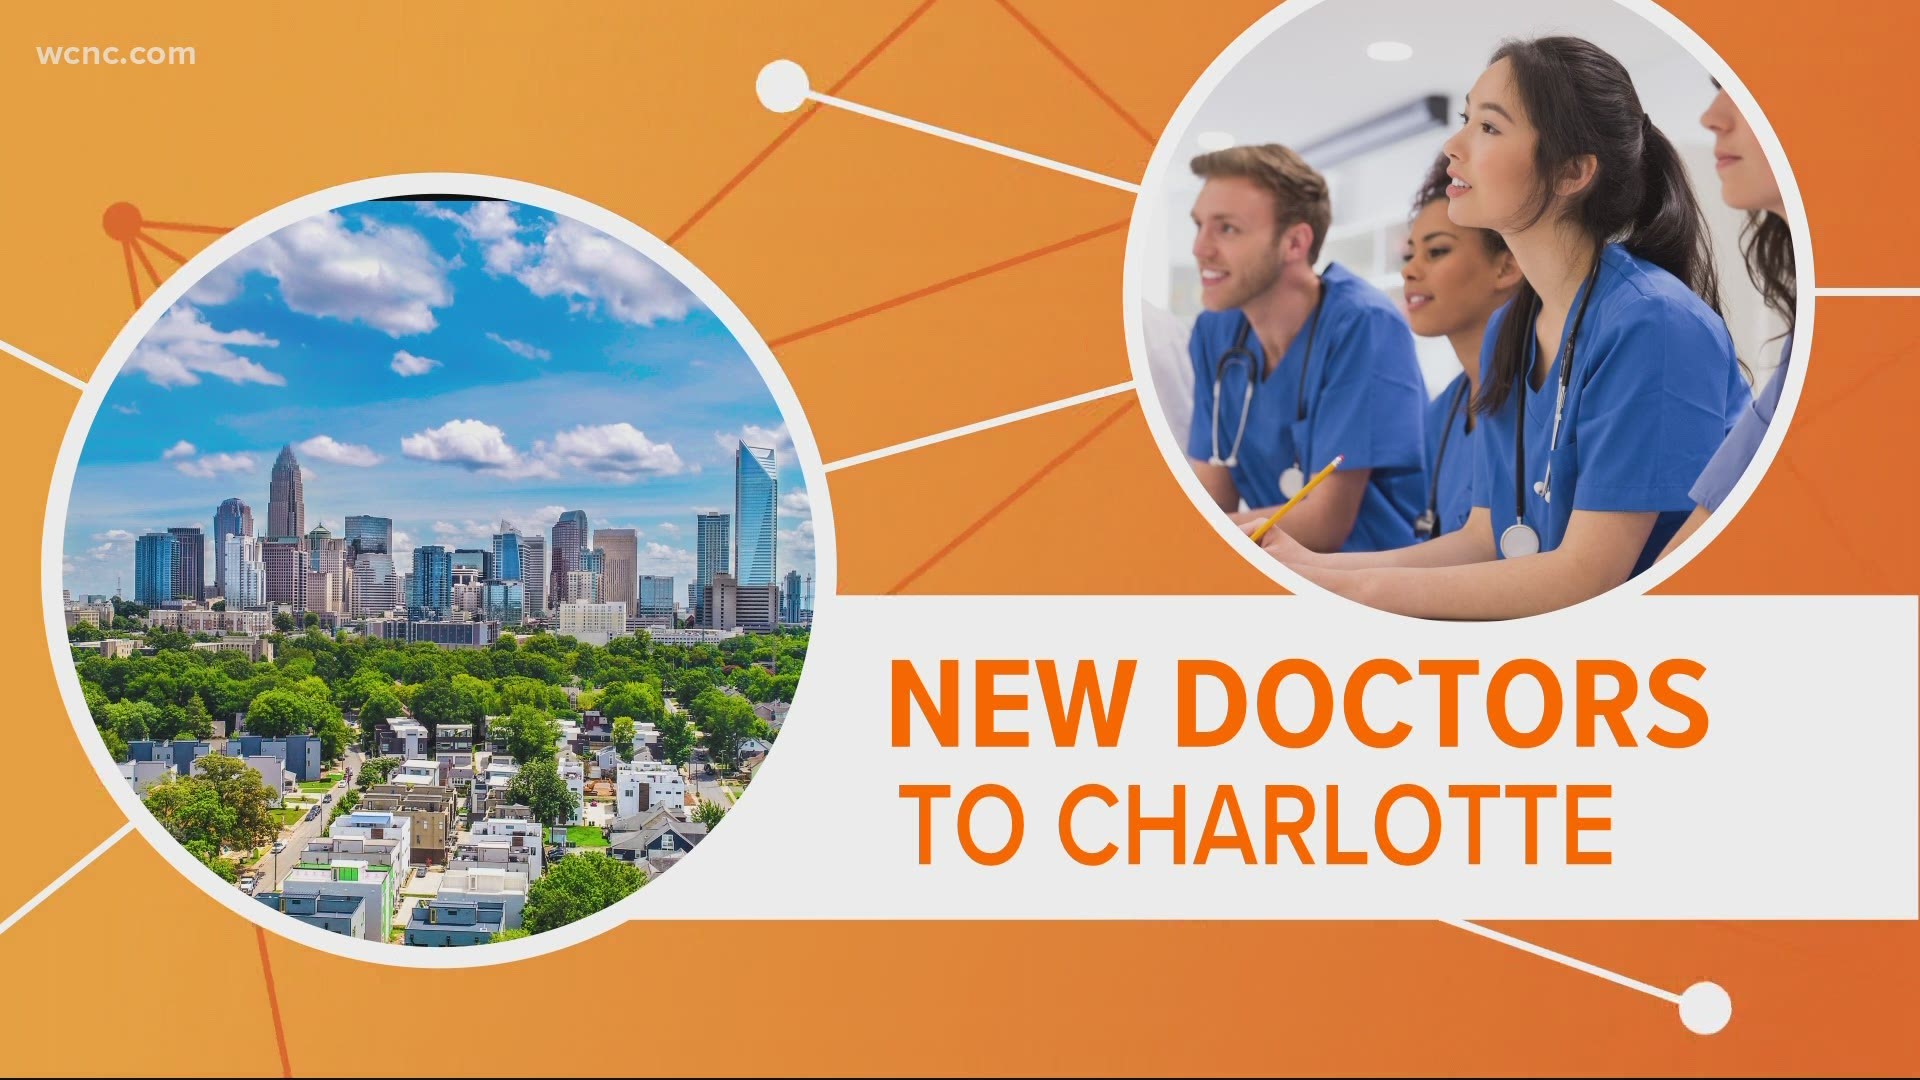 Charlotte finally has plans for a medical school as the Wake Forest School of Medicine announced plans for a 20-acre site in Midtown by 2024.